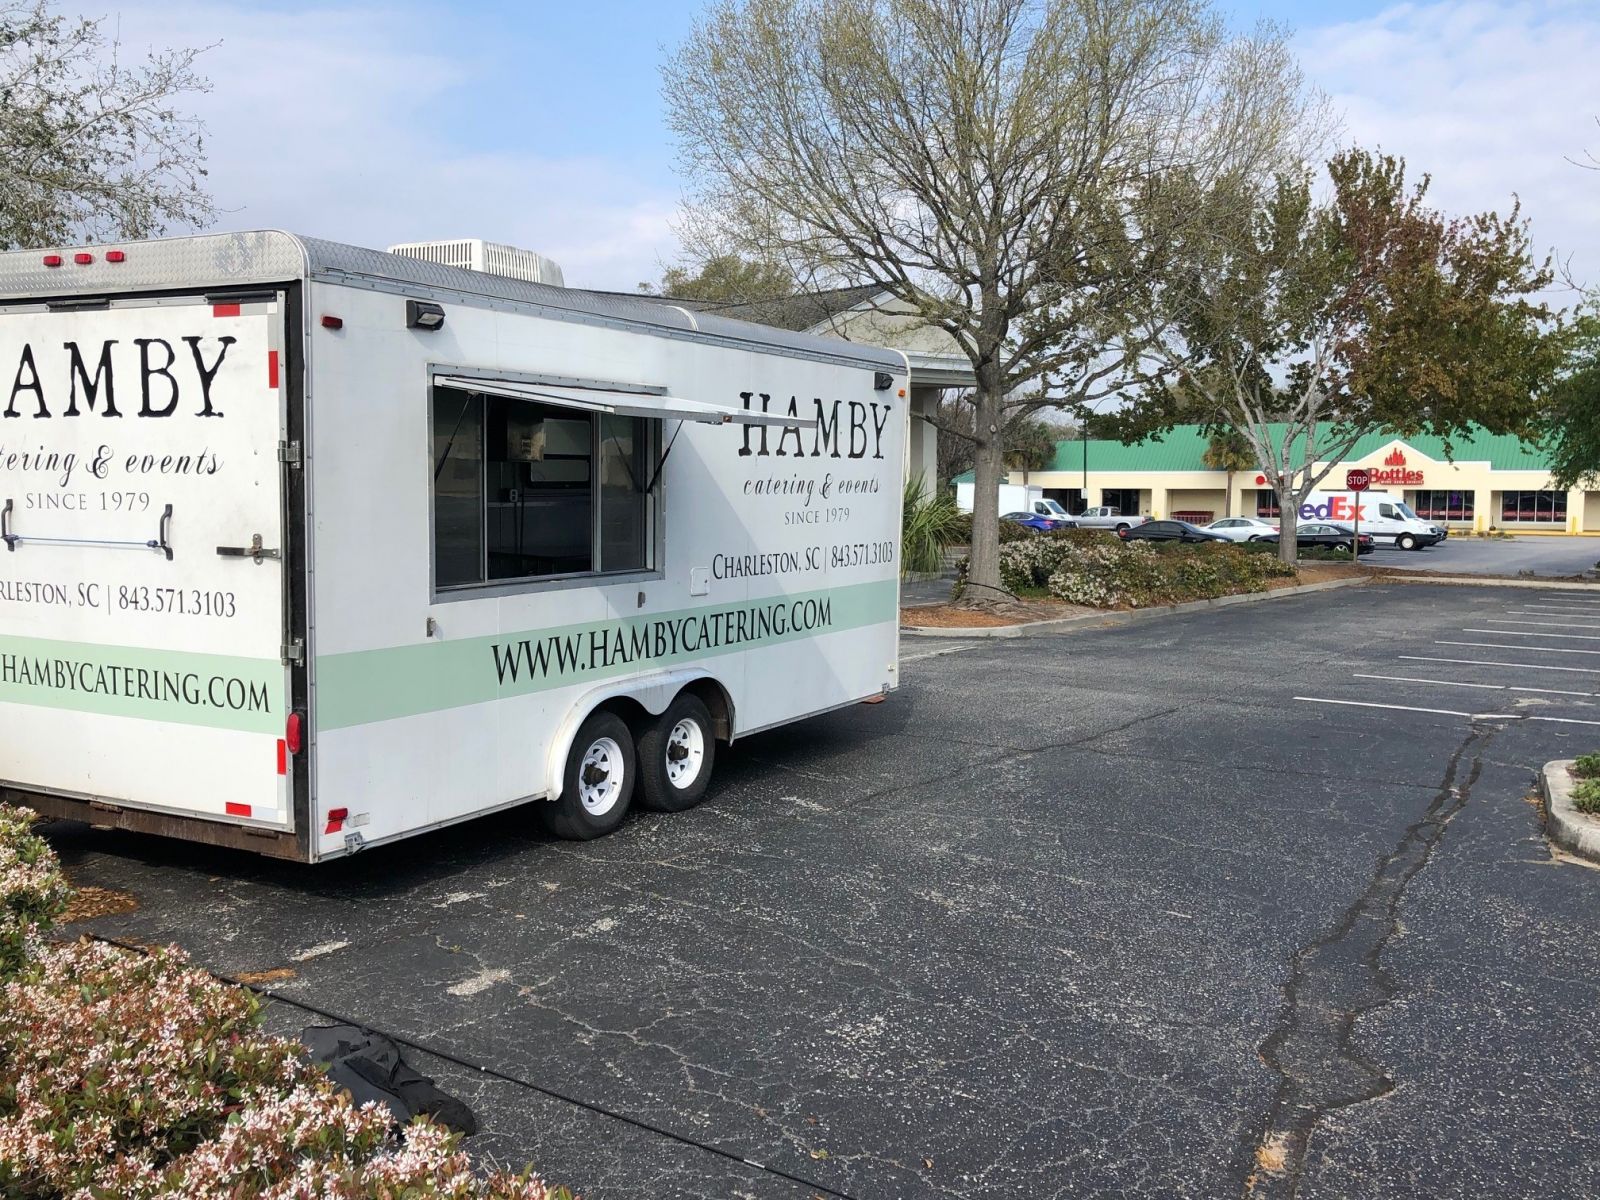 Hamby Catering and Events has moved to "contact-free" and mobile delivery services through the new coronavirus outbreak in South Carolina. (Photo/Provided)